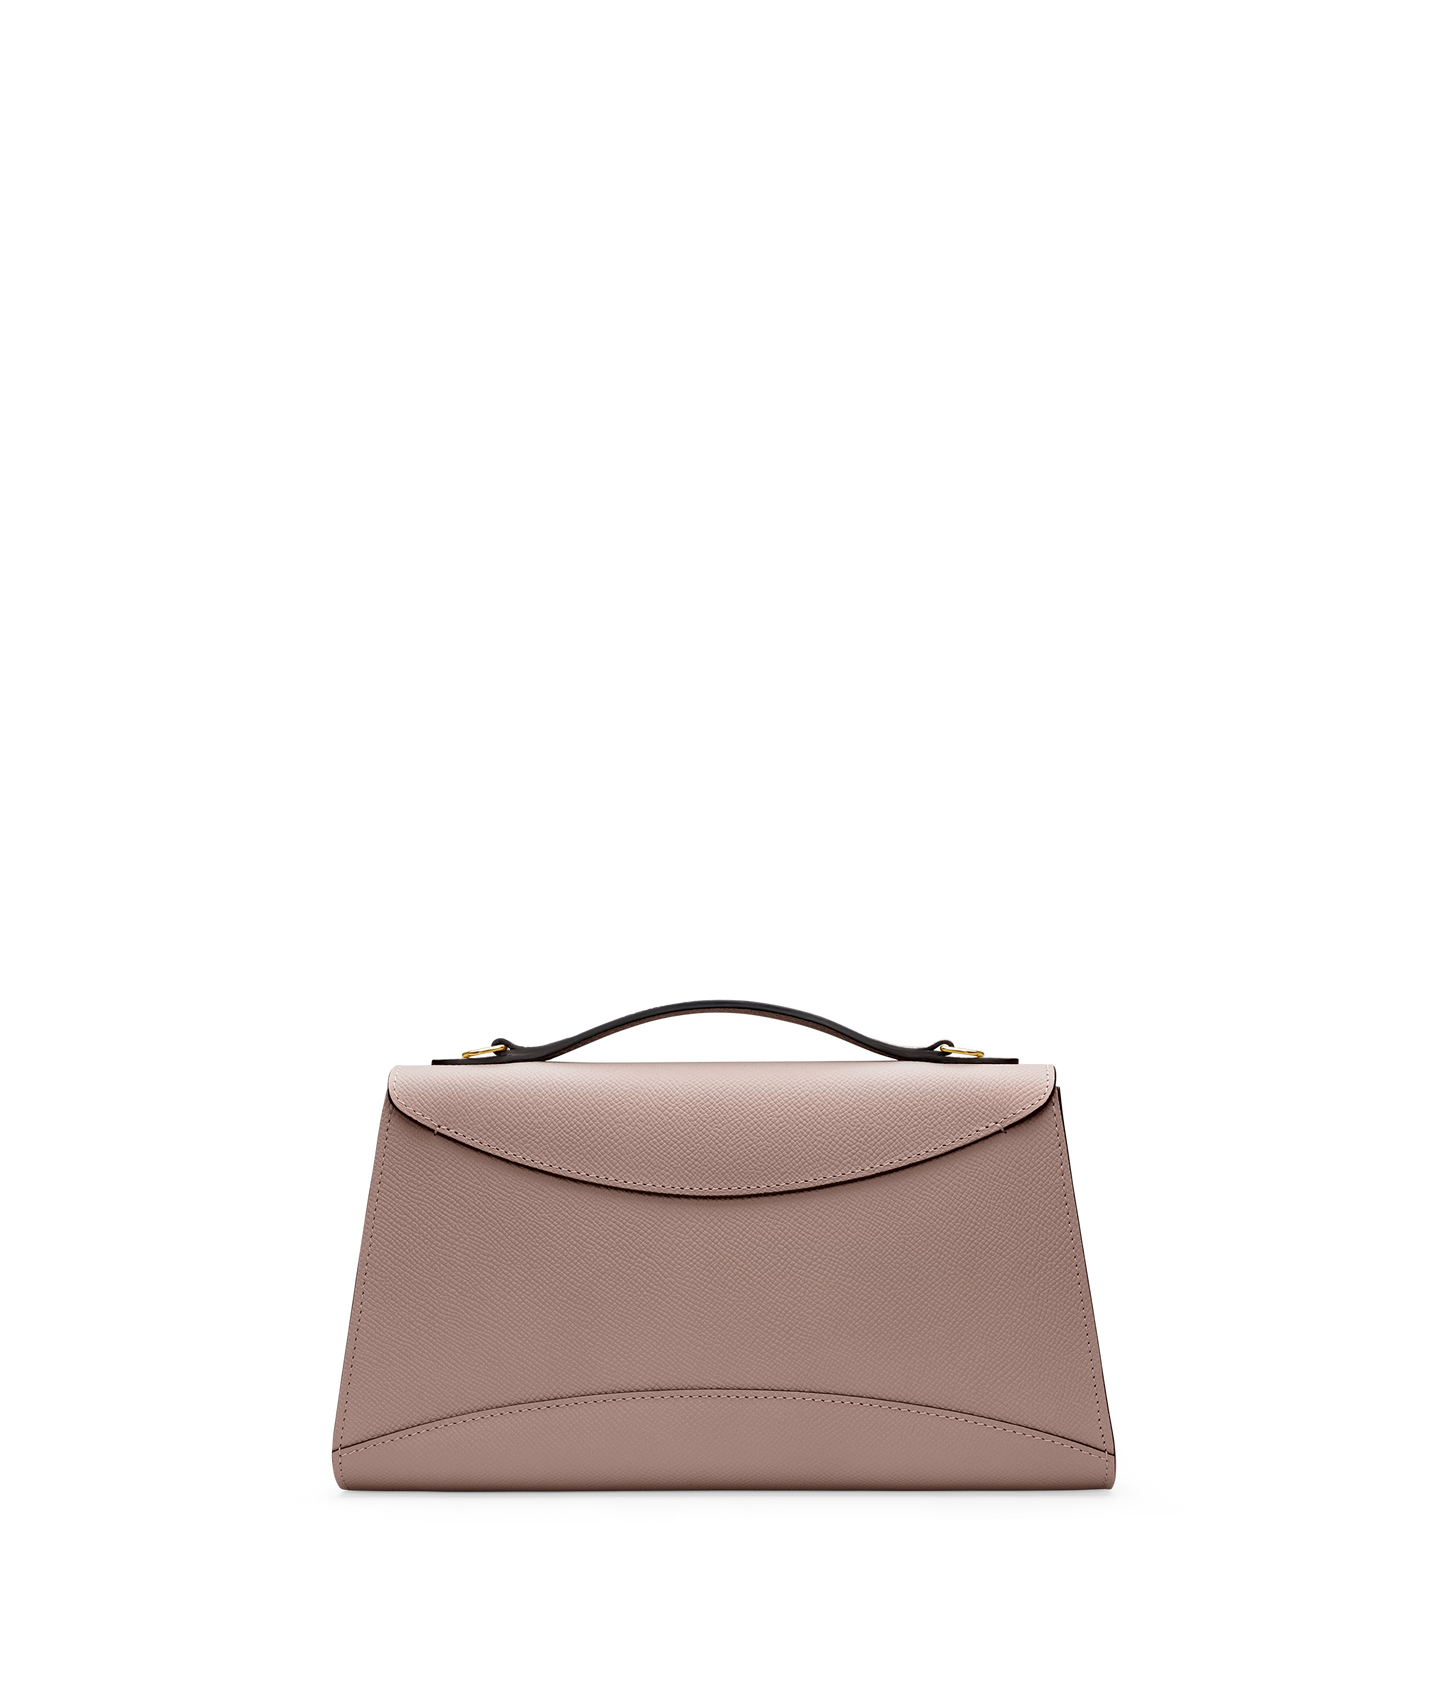 Download Discover luxury in the details with this classic Moynat Gabrielle  Mini bag. Wallpaper